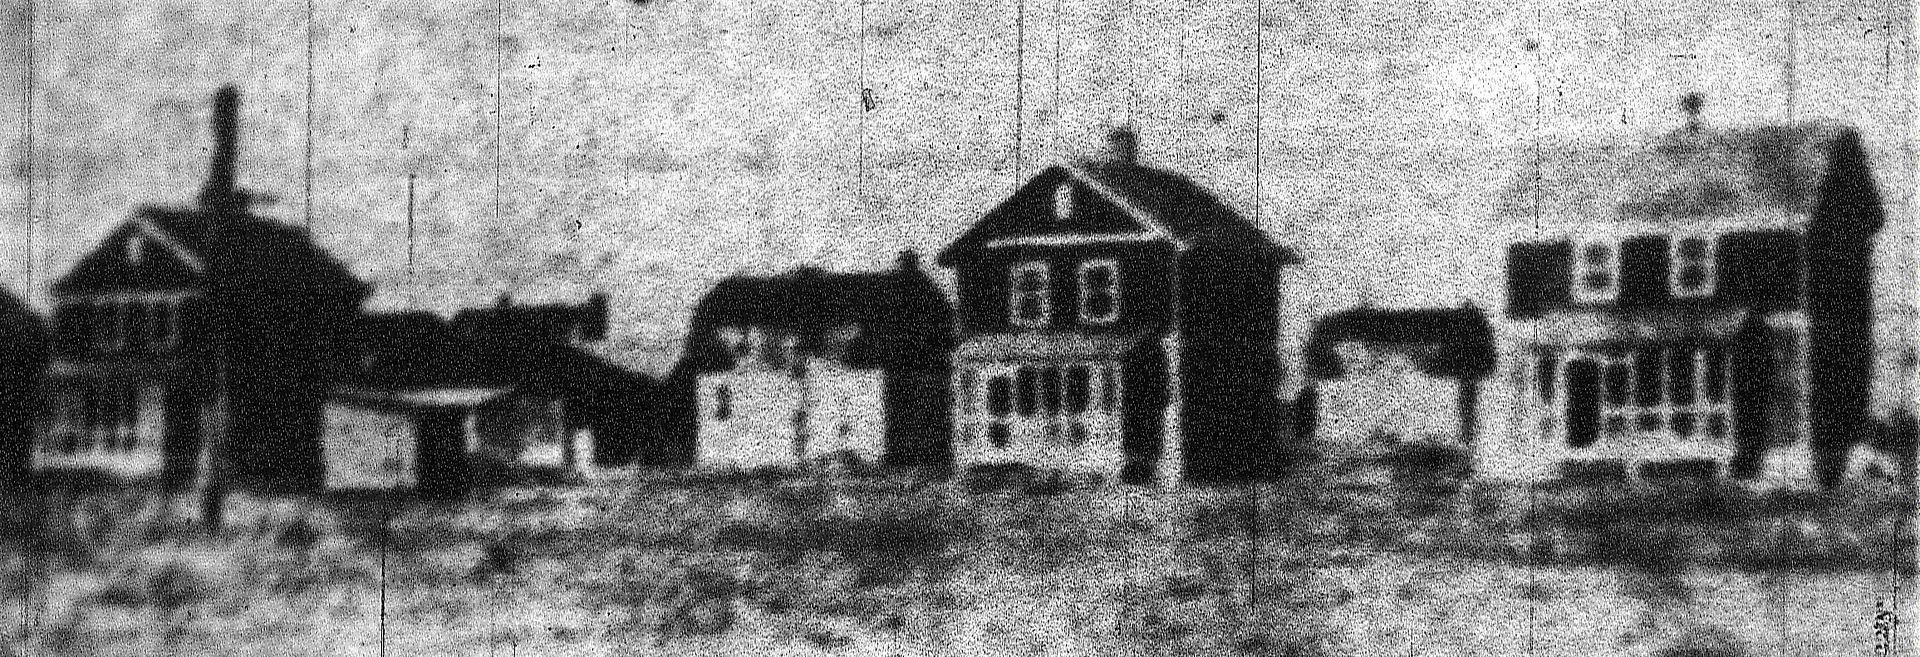 This is the only photo we have of the houses in Penniman. This appeared in the Richmond News Leader article in 1938, and it was a vintage image theyd obtained from a man named 